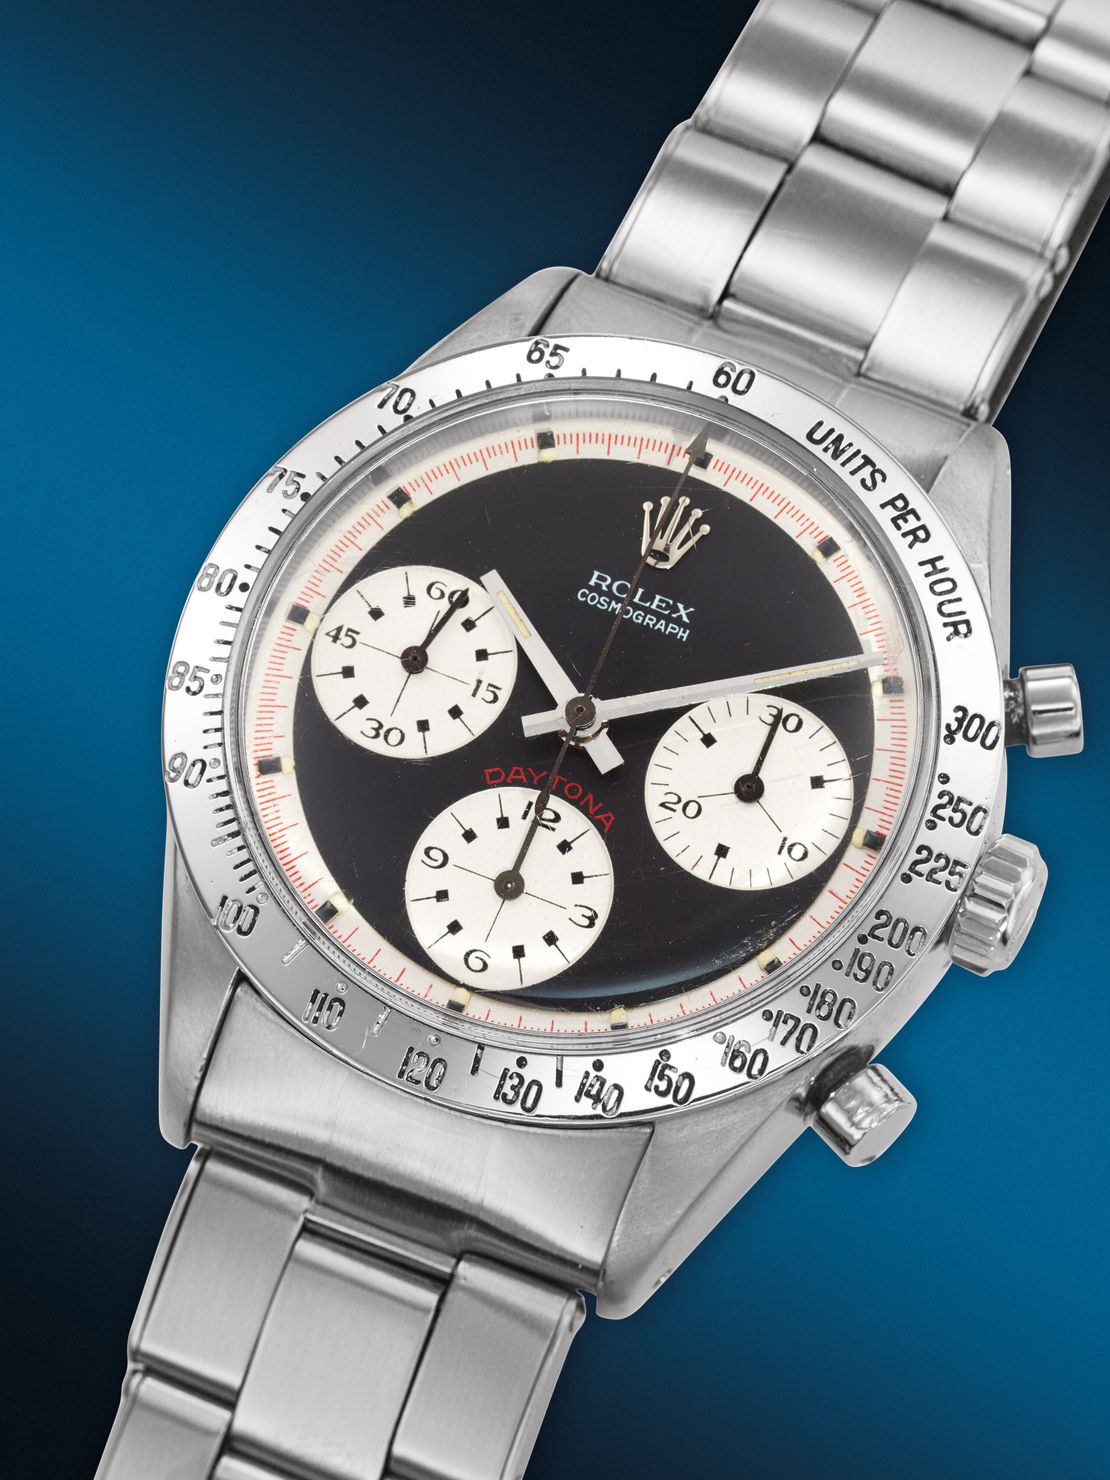 The Rolex Daytona watch was owned by late NASA astronaut Walter Cunningham.